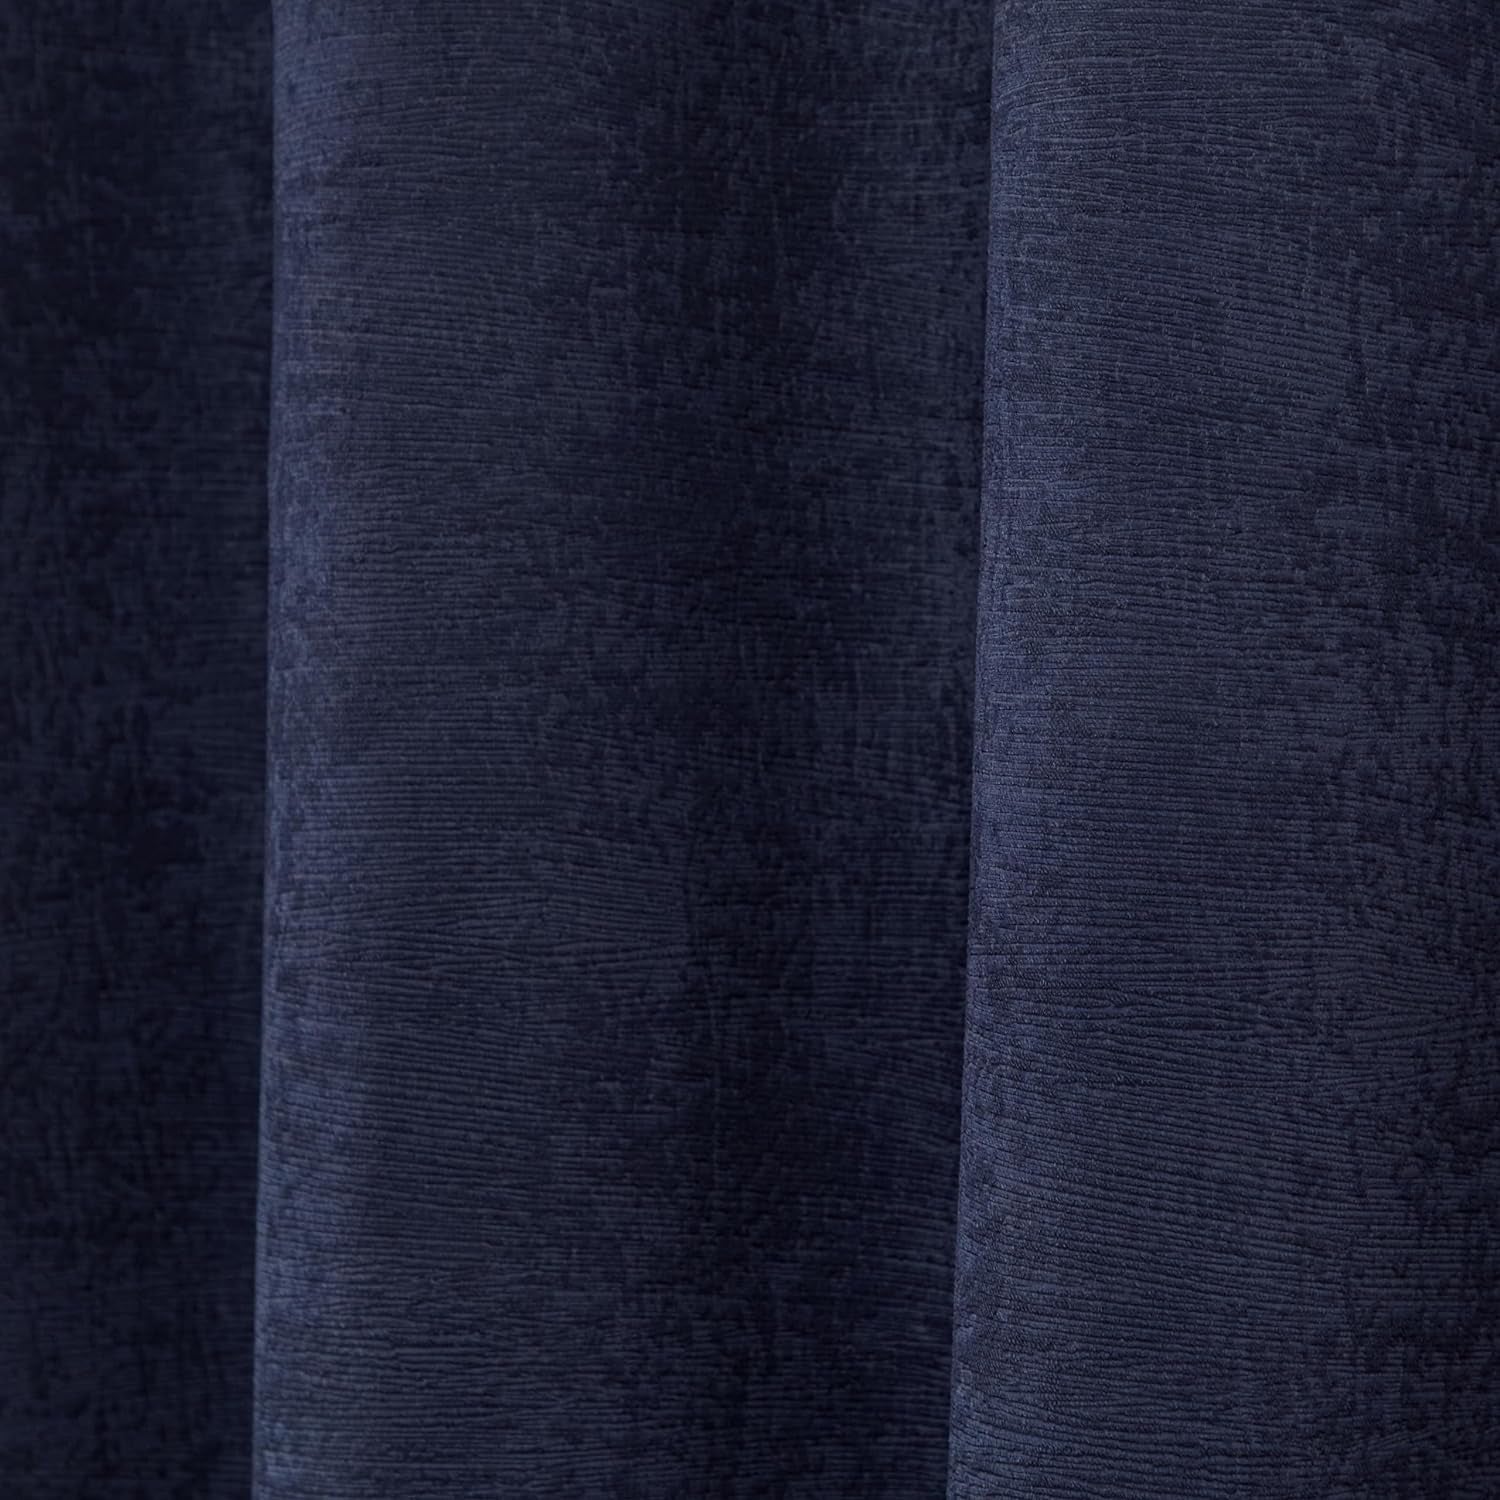 Exclusive Home Oxford Textured Sateen Room Darkening Blackout Grommet Top Curtain Panel Pair, 52"X108", Navy  Exclusive Home Curtains   